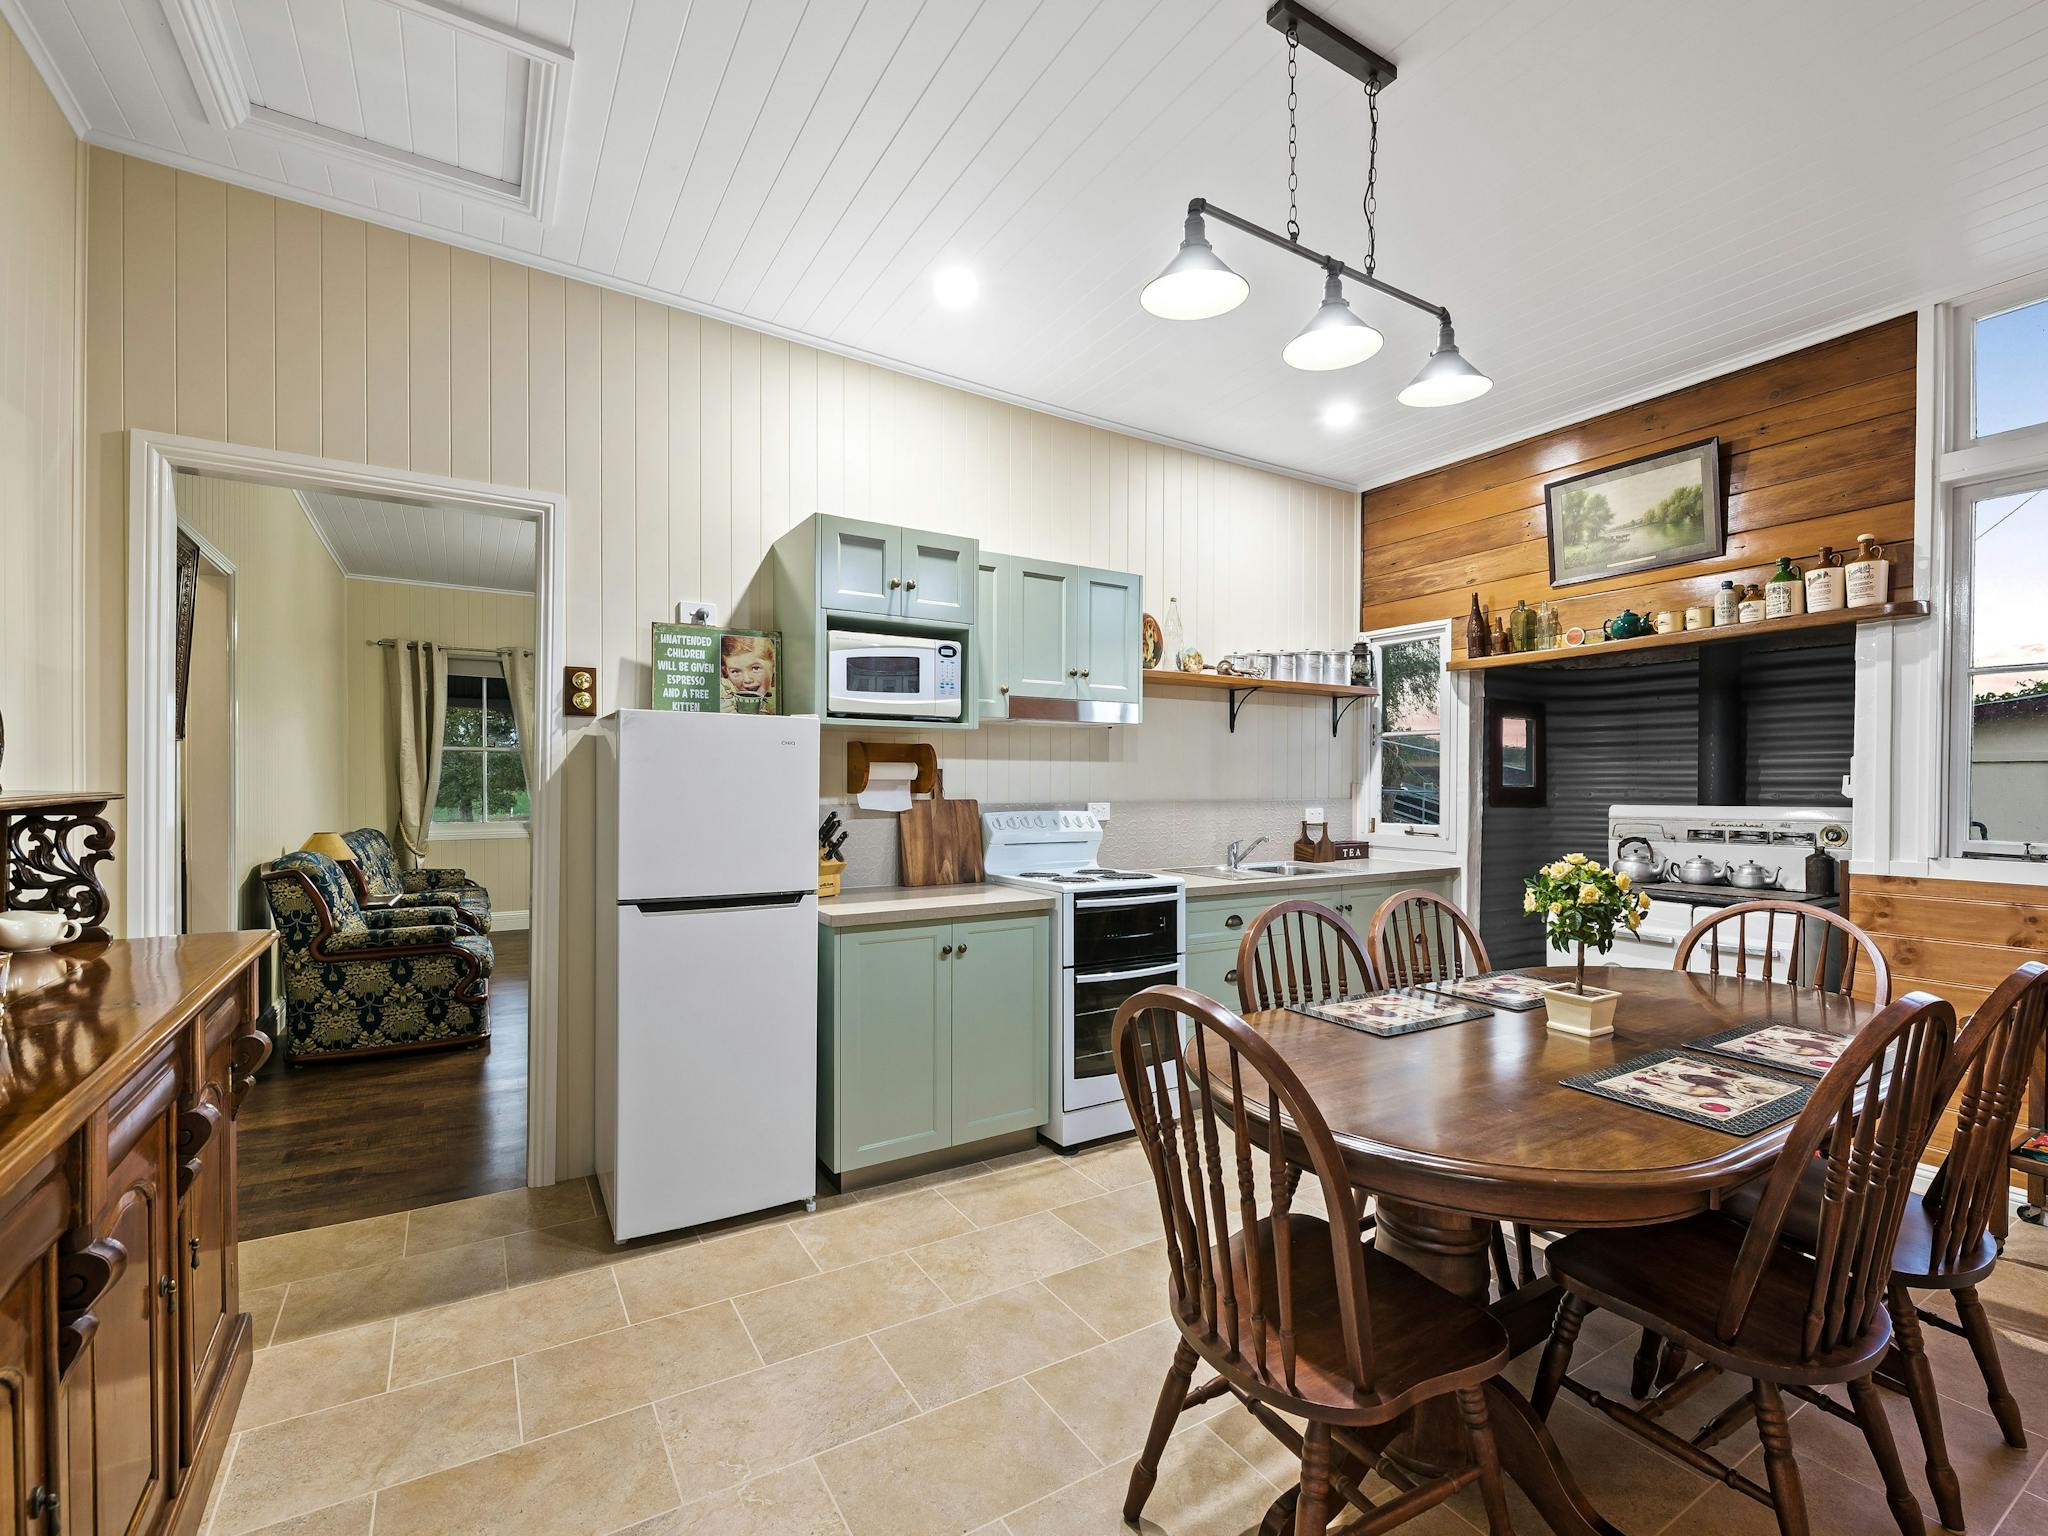 Mountview Homestead has a fully equiped kitchen, including fridge/freezer, oven and microwave.a